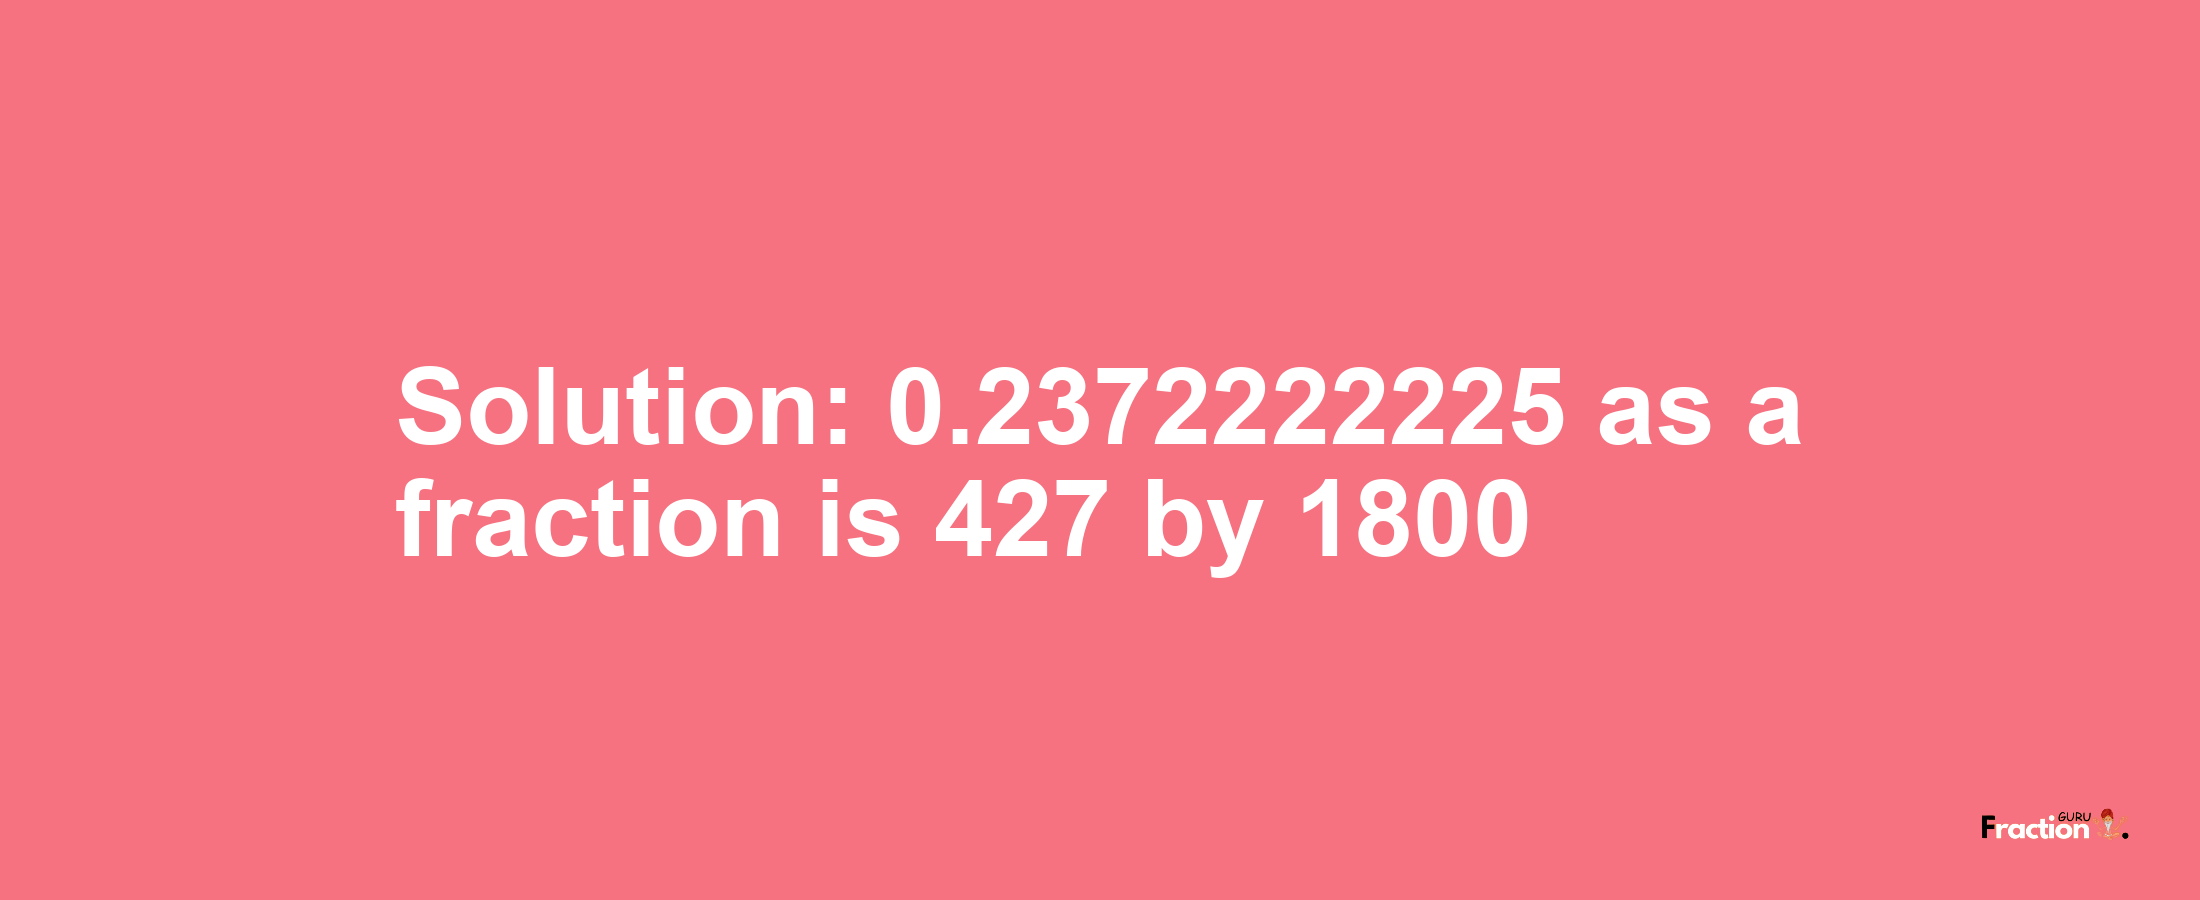 Solution:0.2372222225 as a fraction is 427/1800